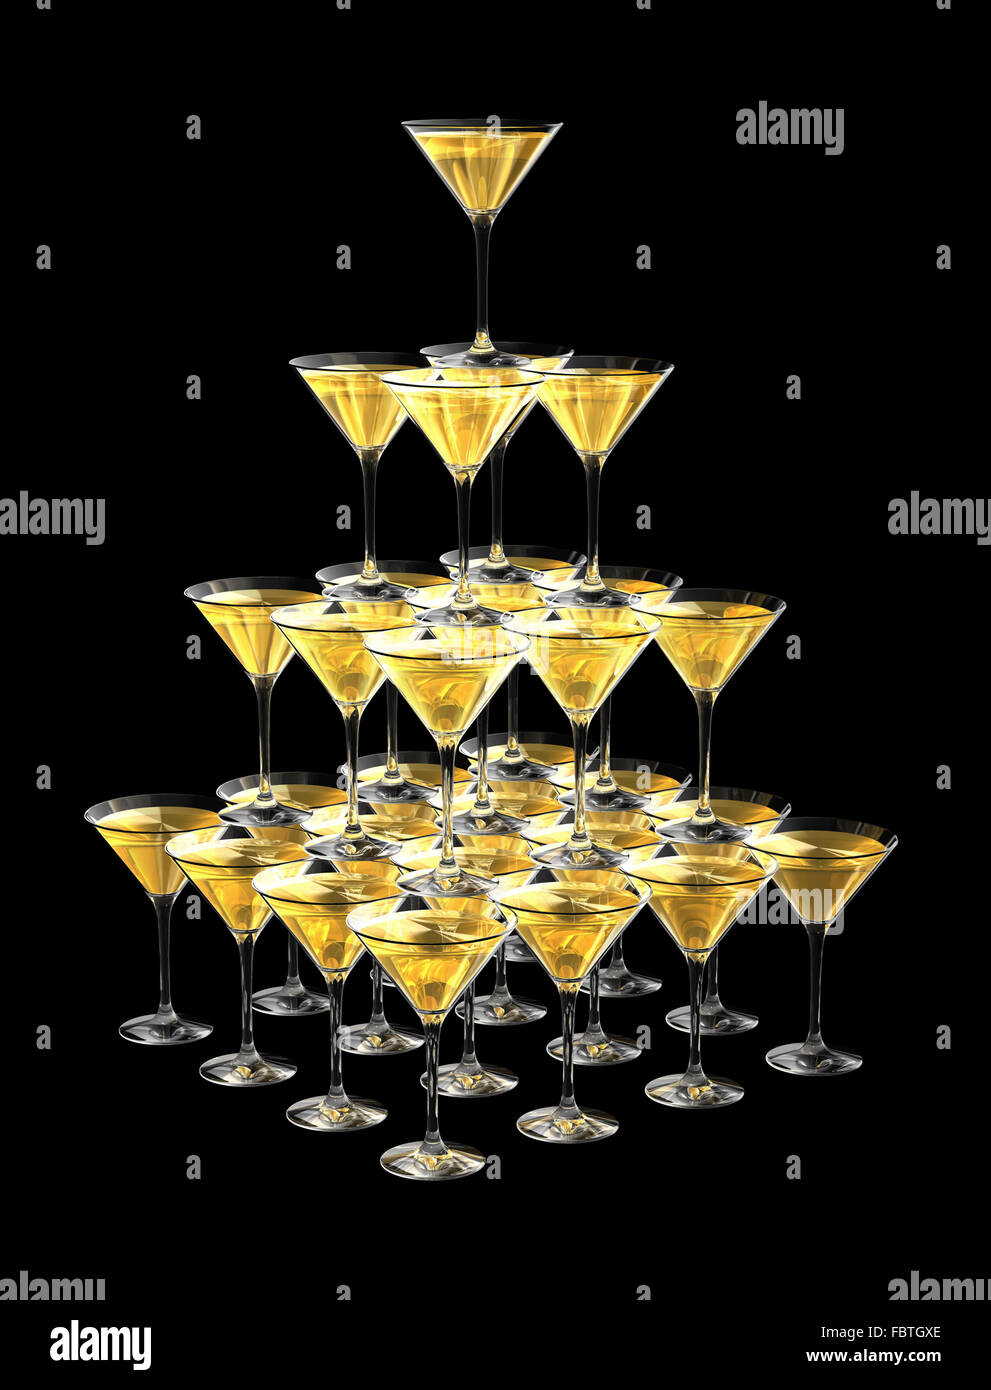 3D pyramid of champagne glasses Stock Photo